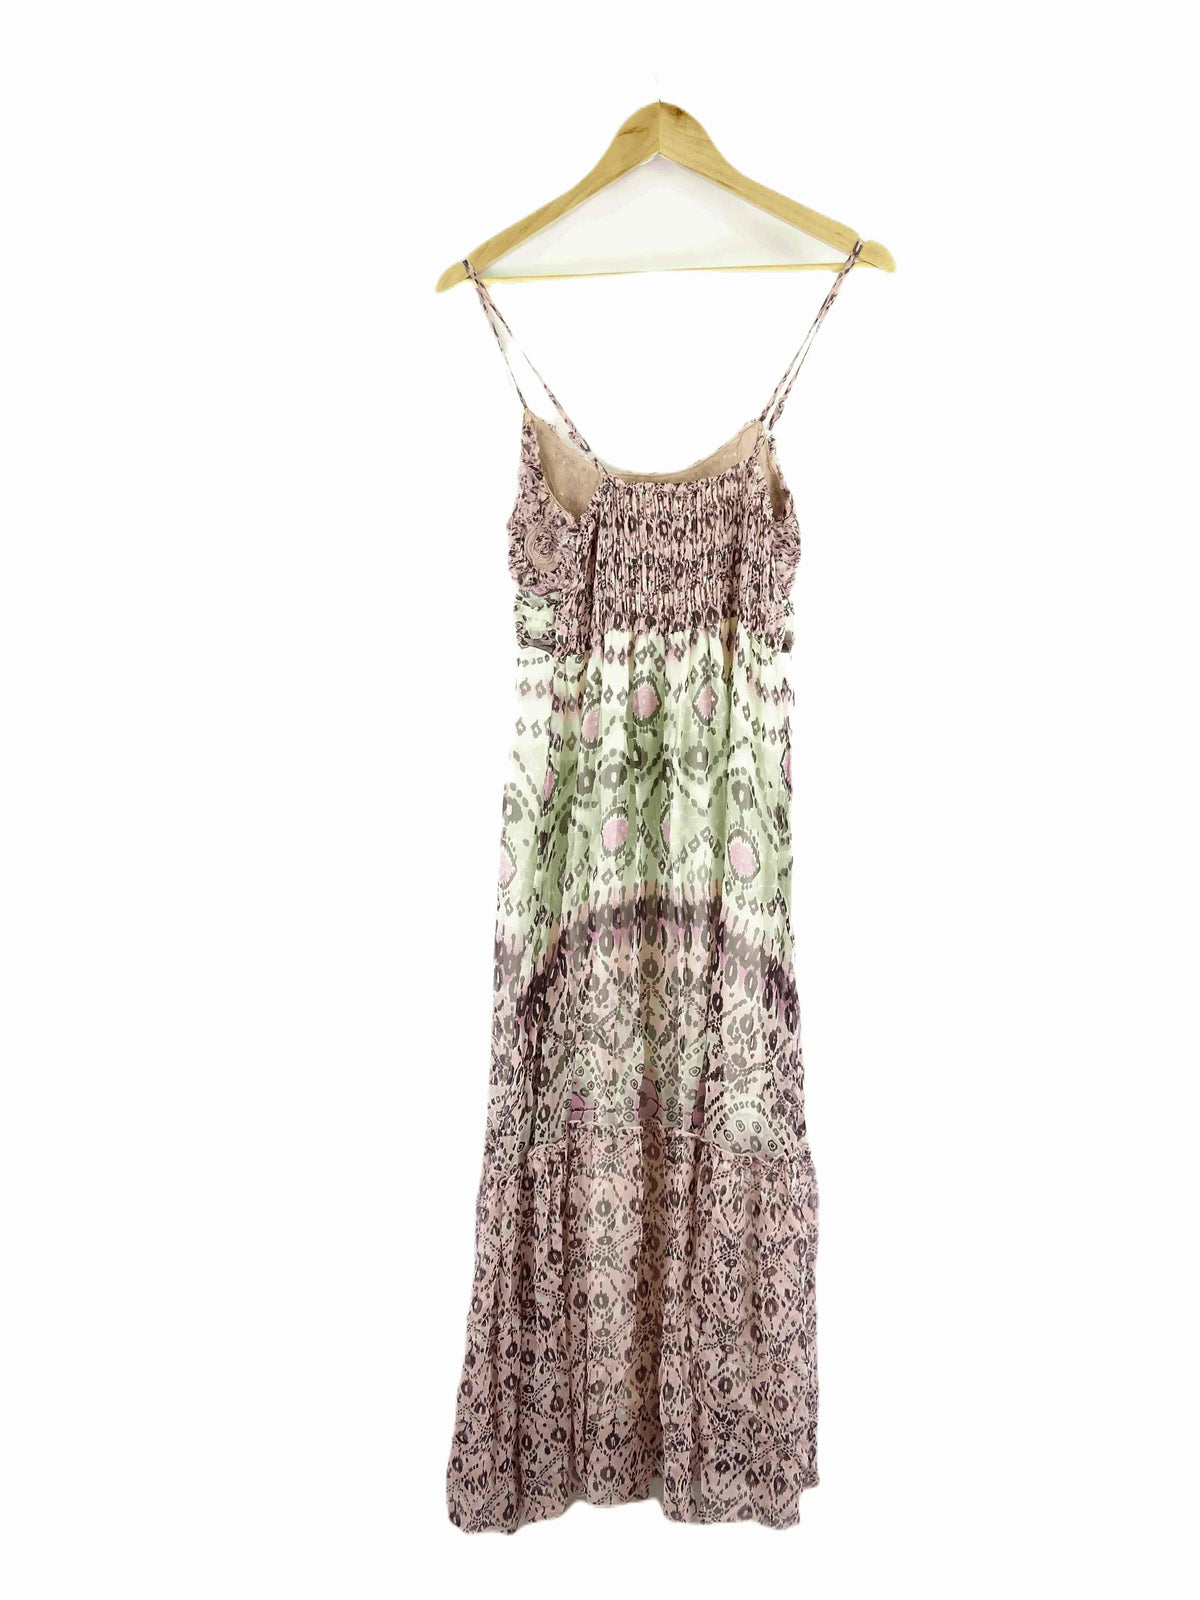 Celeste M Pink and Green Print Maxi Dress S